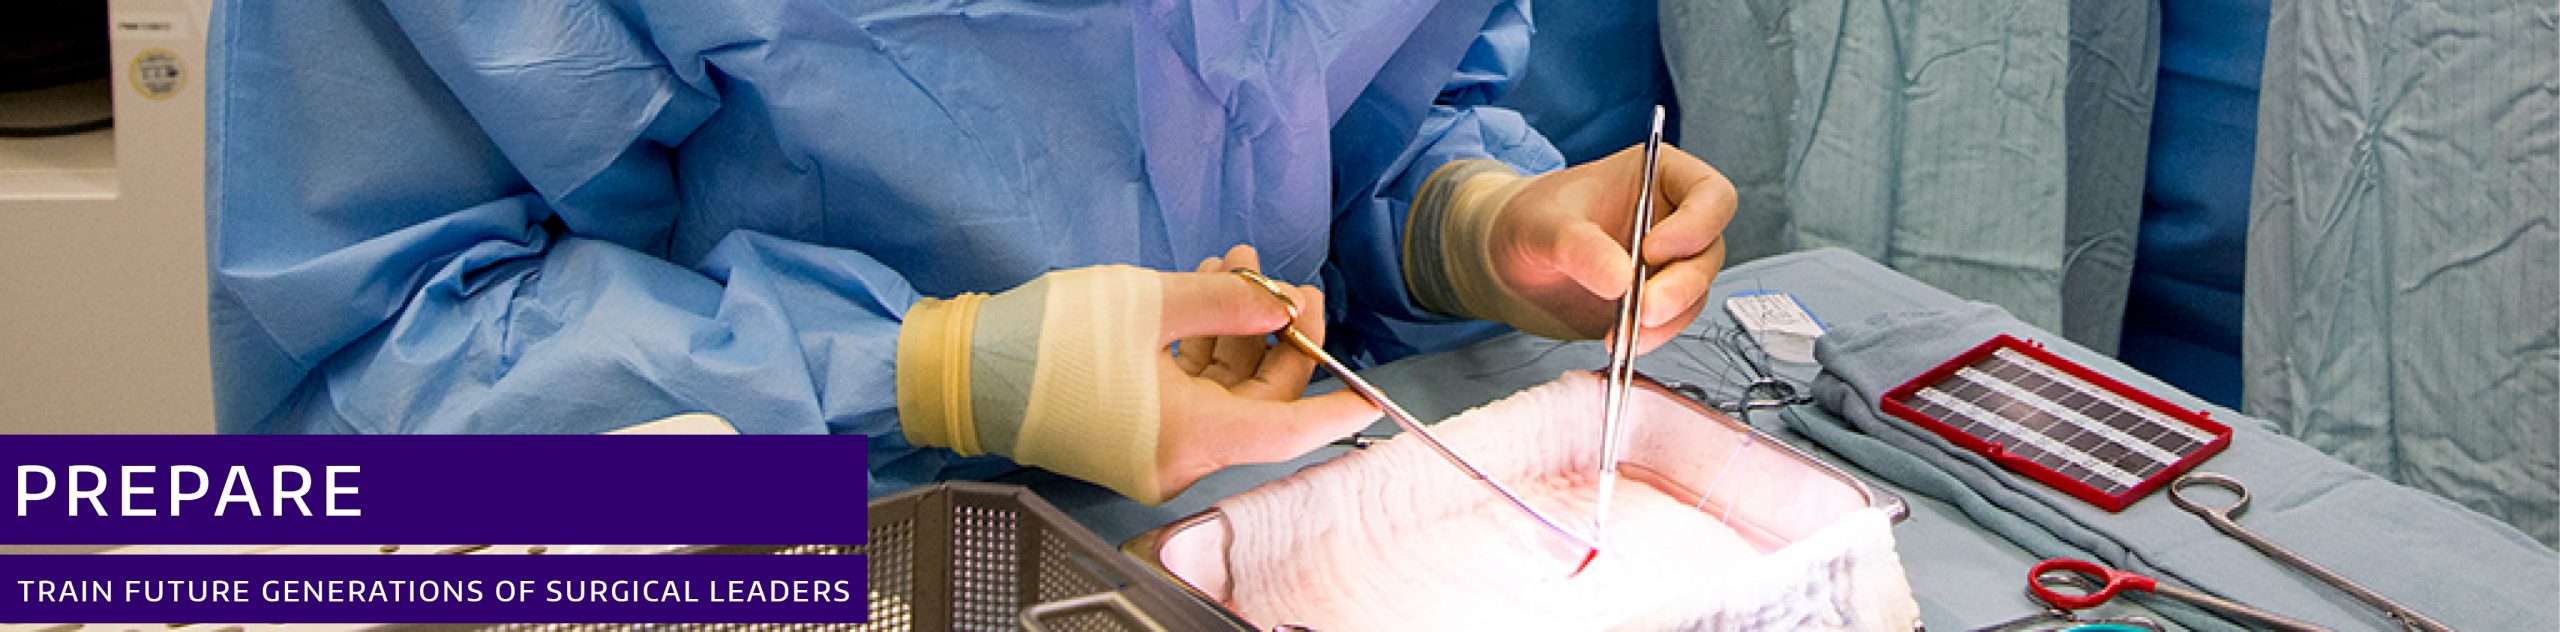 Department of Surgery Prepare Train Future Generations of Surgical Leaders